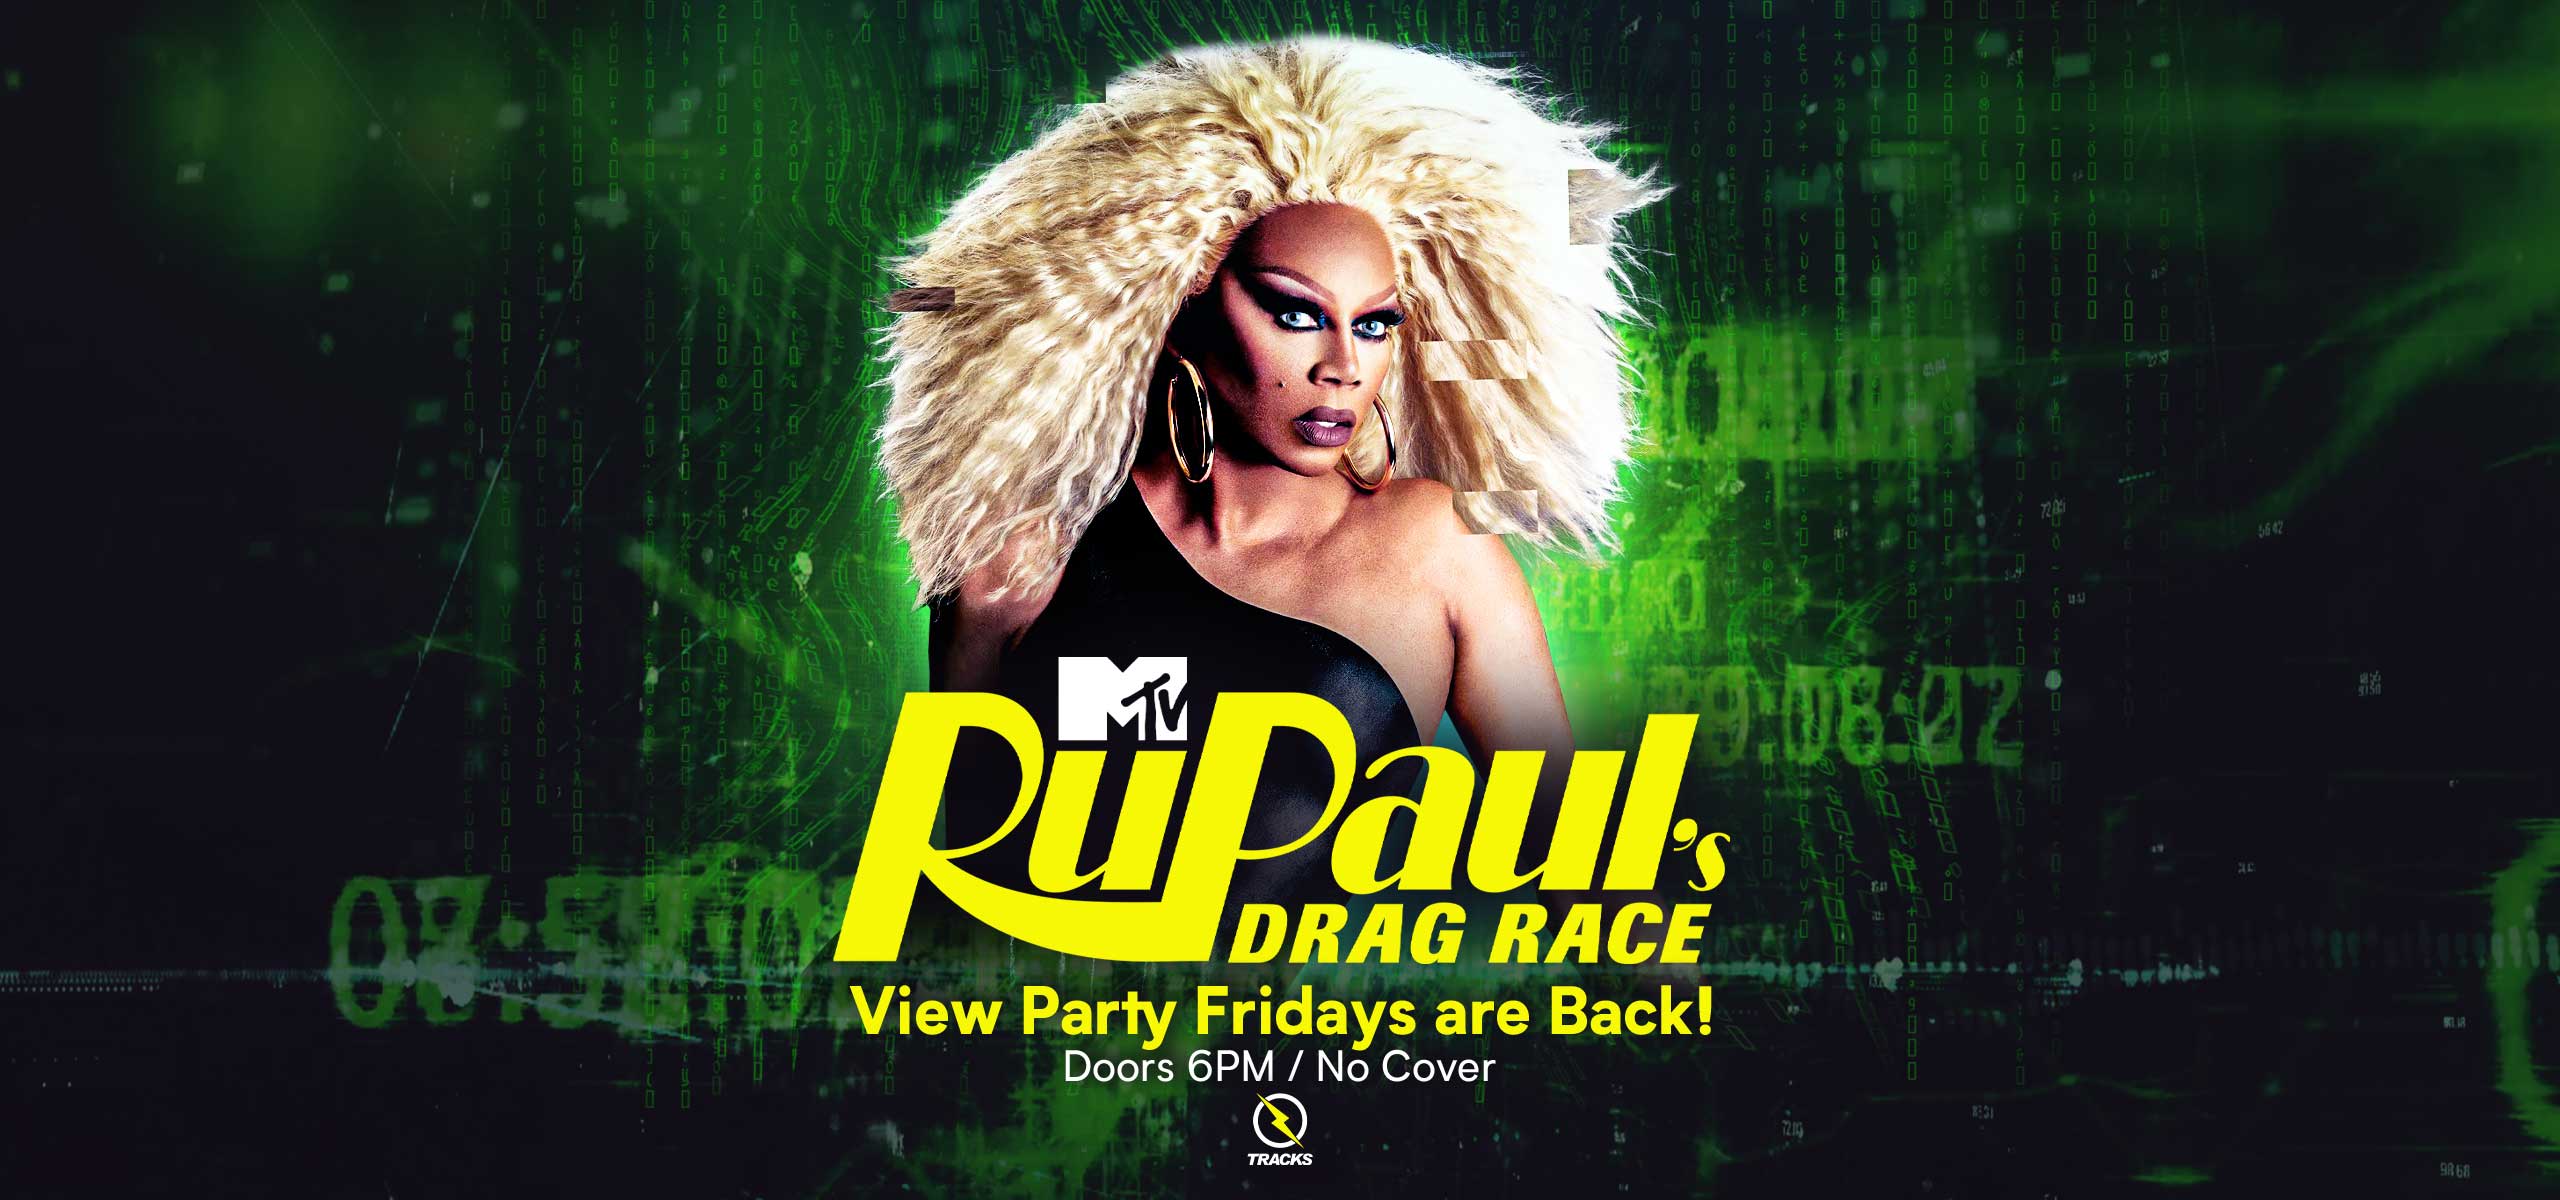 21+ RuPaul’s Drag Race – View Party Fridays